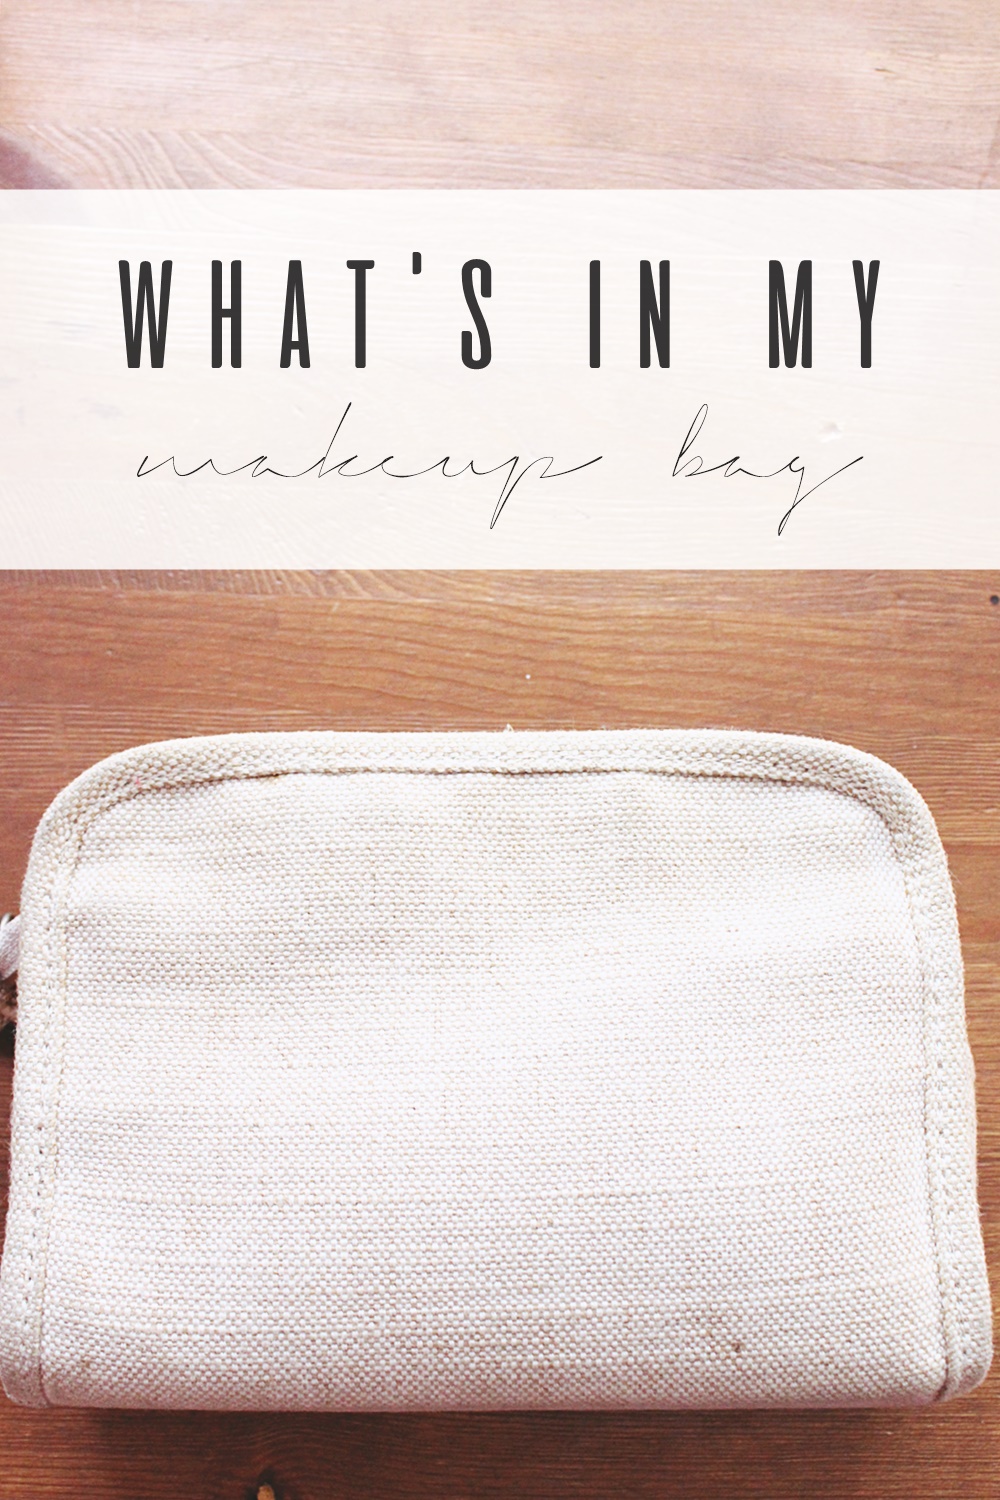 What's in my makeup bag"